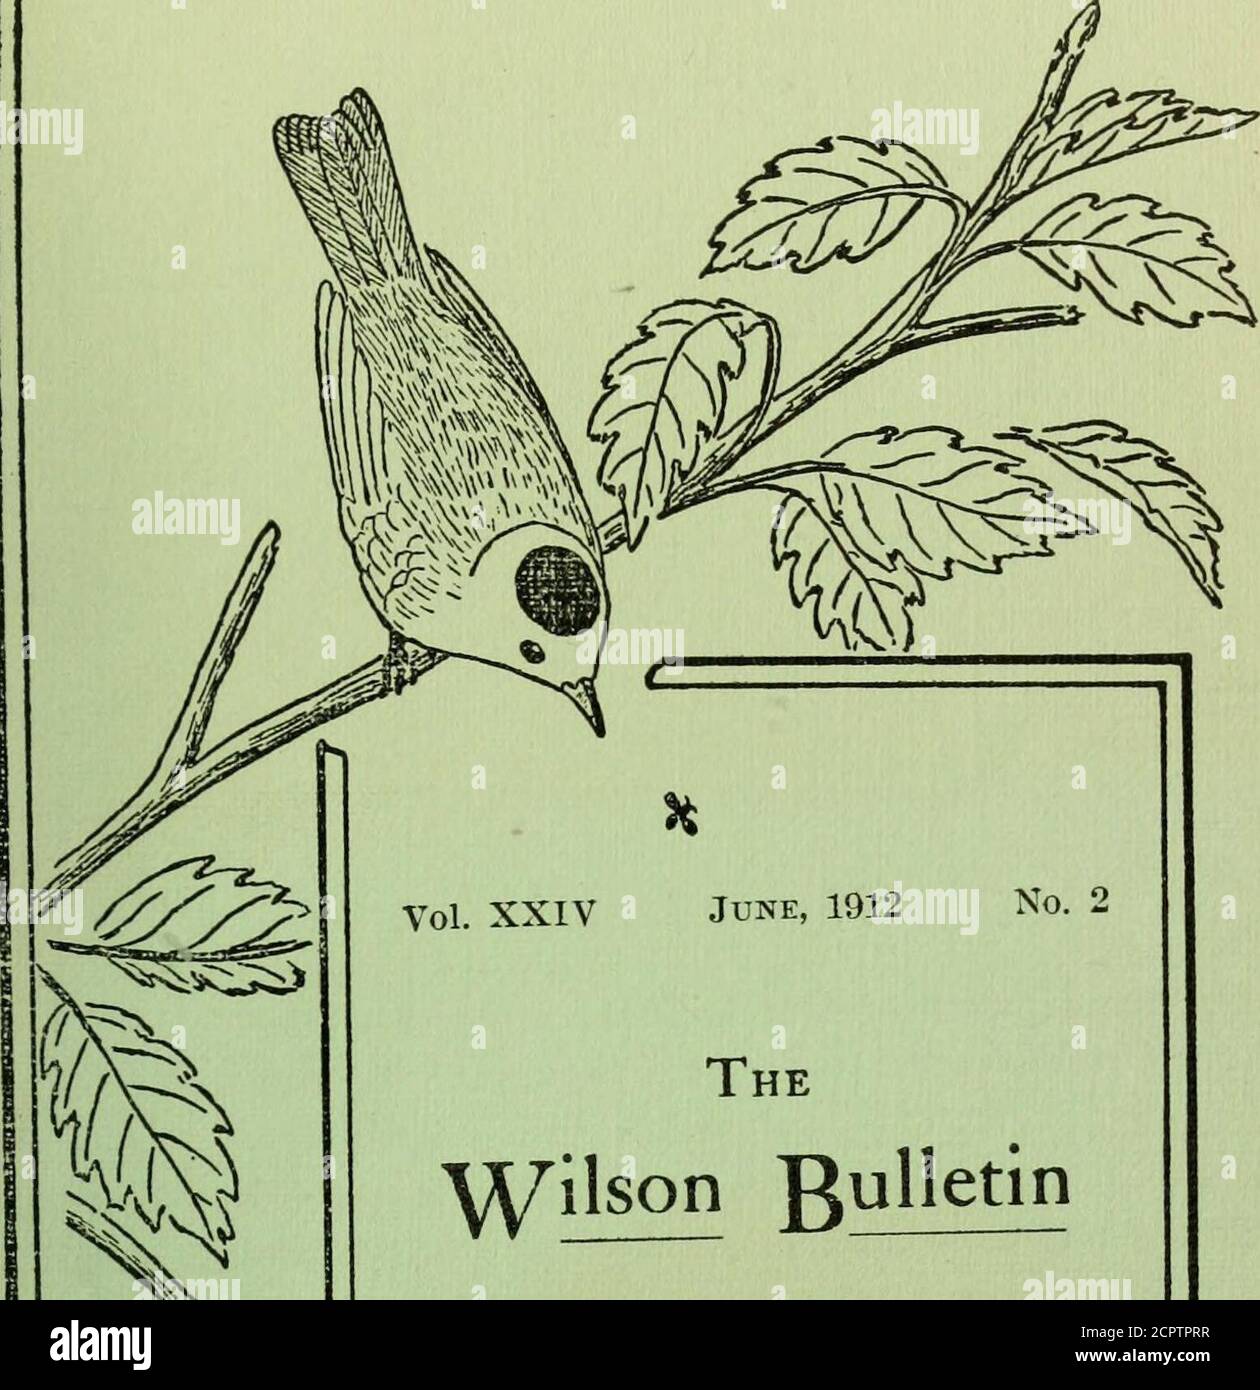 . The Wilson bulletin . March, June, September and December, bythe Wilson Ornithological Club at Oberlin, Ohio, edited by LyndsJones. Subscription: One Dollar a year, including postage, strictly in ad-vance. Single numbers, 30 cents, unless they are Special numbers,when a special price is fixed. The Bulletin, including all Specialnumbers, is free to all paid up members, either Active, Associate, orHonorary, after their election. Subscriptions may be addressed to the editor, or to Mr. Frank L.Burns, Berwyn, Pa. Advertisements should be addressed to The Wilson Bulletin,Oberlin, Ohio. Terms vdll Stock Photo